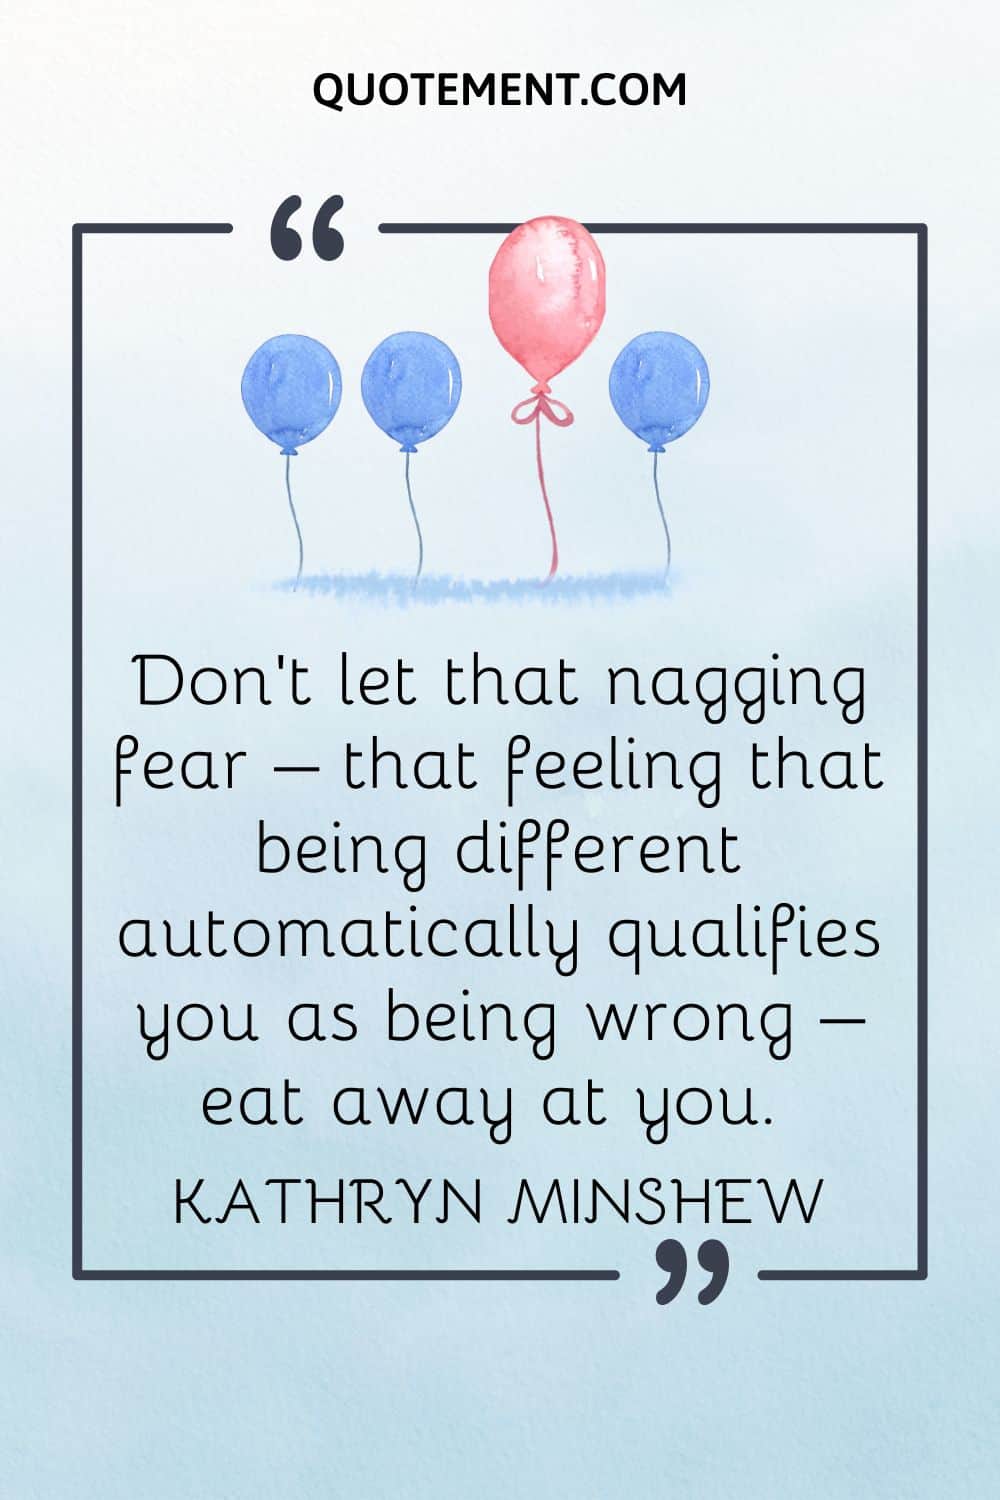 Don't let that nagging fear – that feeling that being different automatically qualifies you as being wrong – eat away at you